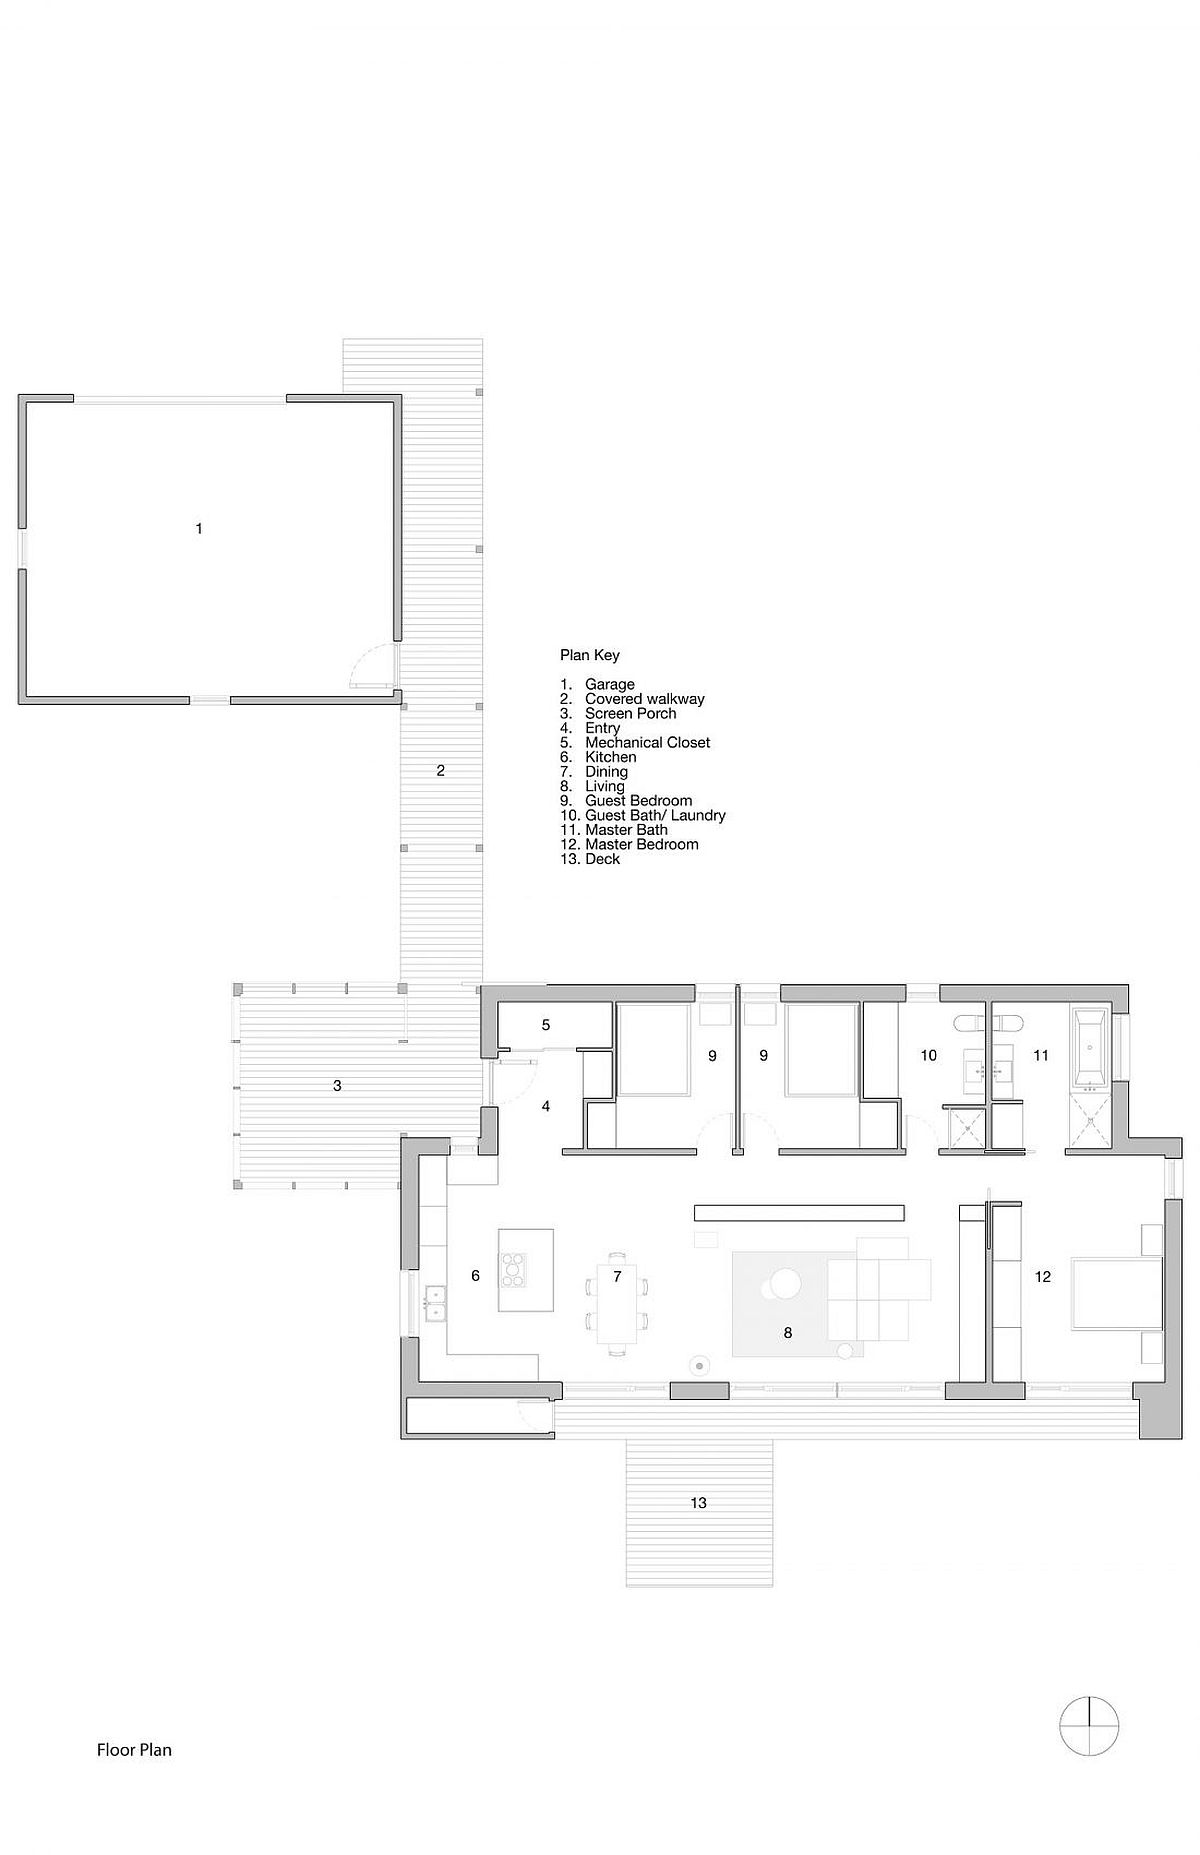 Floor plan of Cousins River Residence in Maine